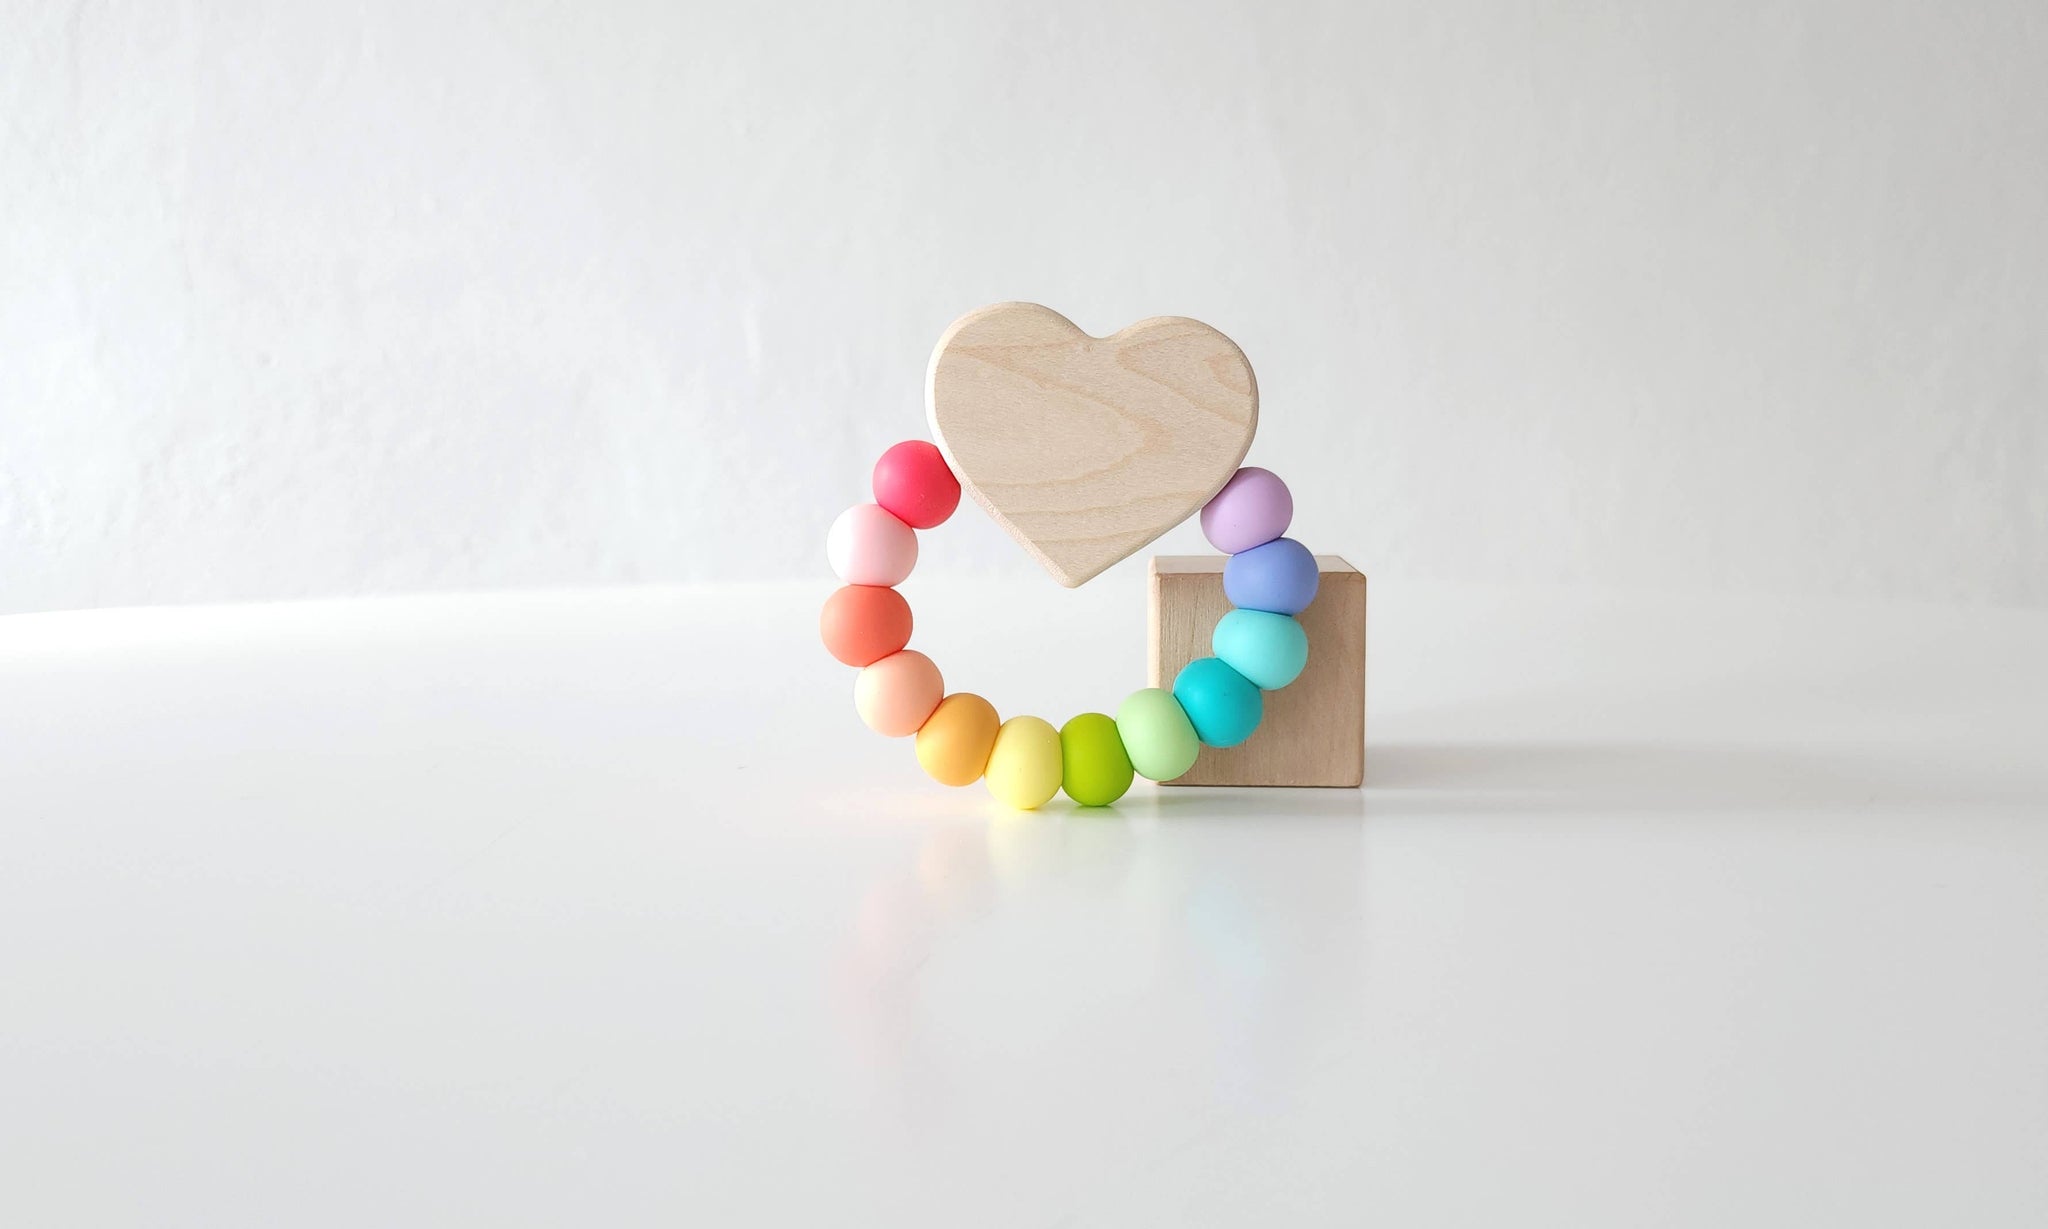 *Heart Charm Wooden and Silicone Baby Teething Toy